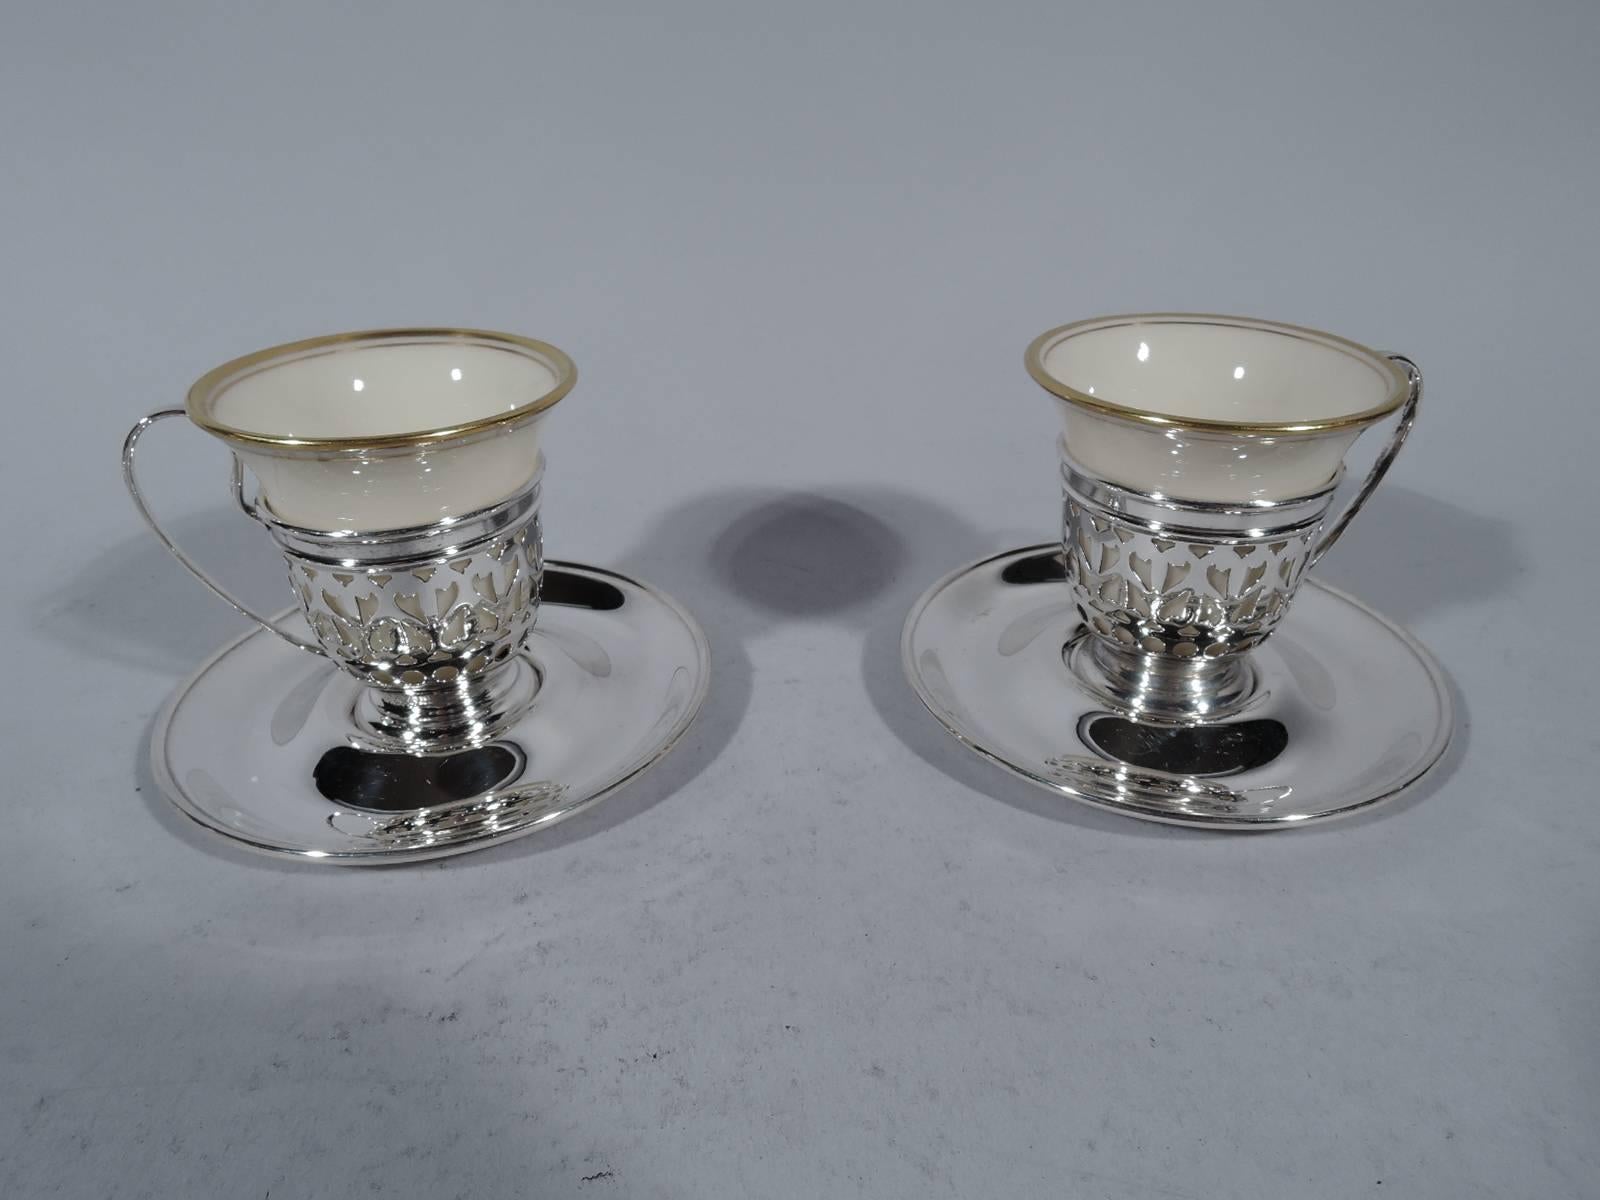 Set of 16 sterling silver demitasse cup holders and saucers with 16 bone china liners. The holders and saucers with made by Gorham in Providence, circa 1910. The liners were made by Lenox in Trenton, New Jersey.

Holder: Stepped foot and high